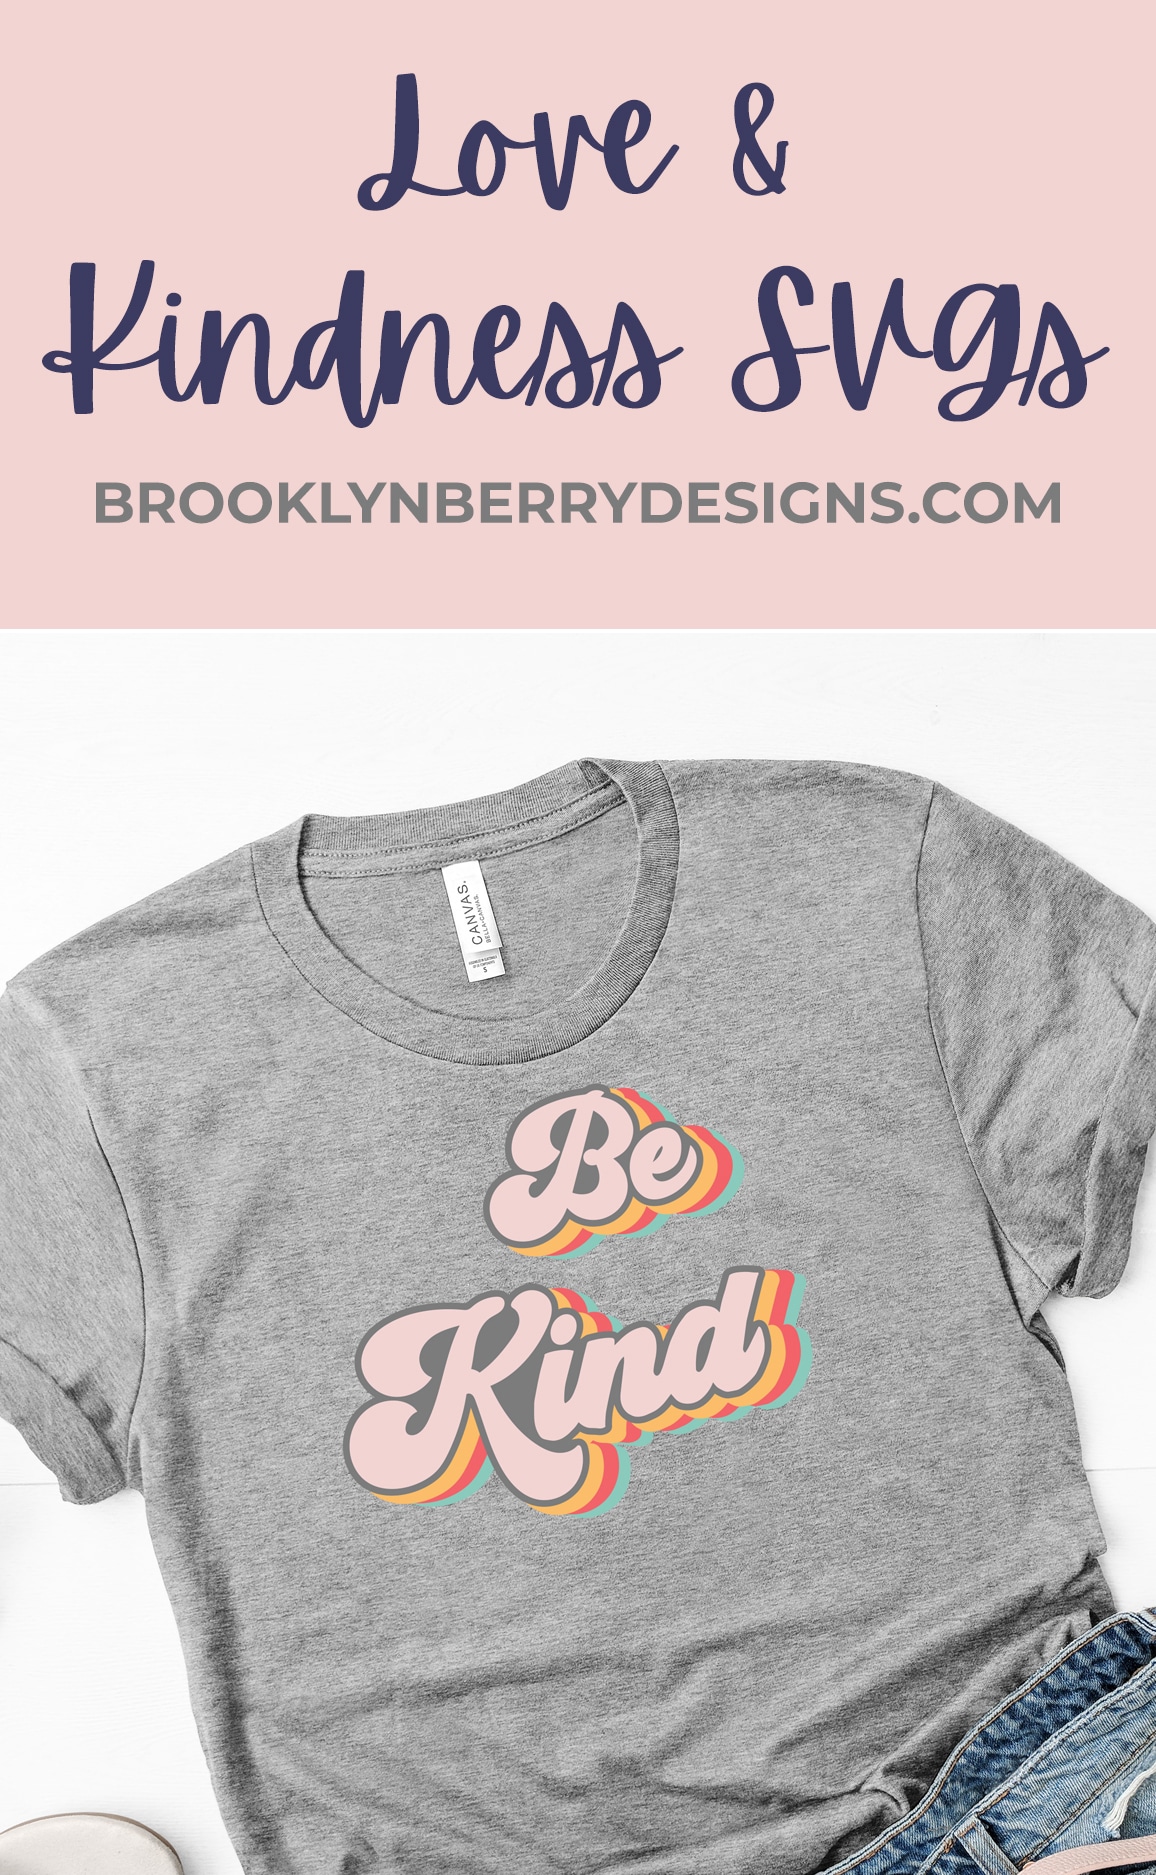 Be kind svg - a retro 70s style lettering to promote love and kindness via @brookeberry